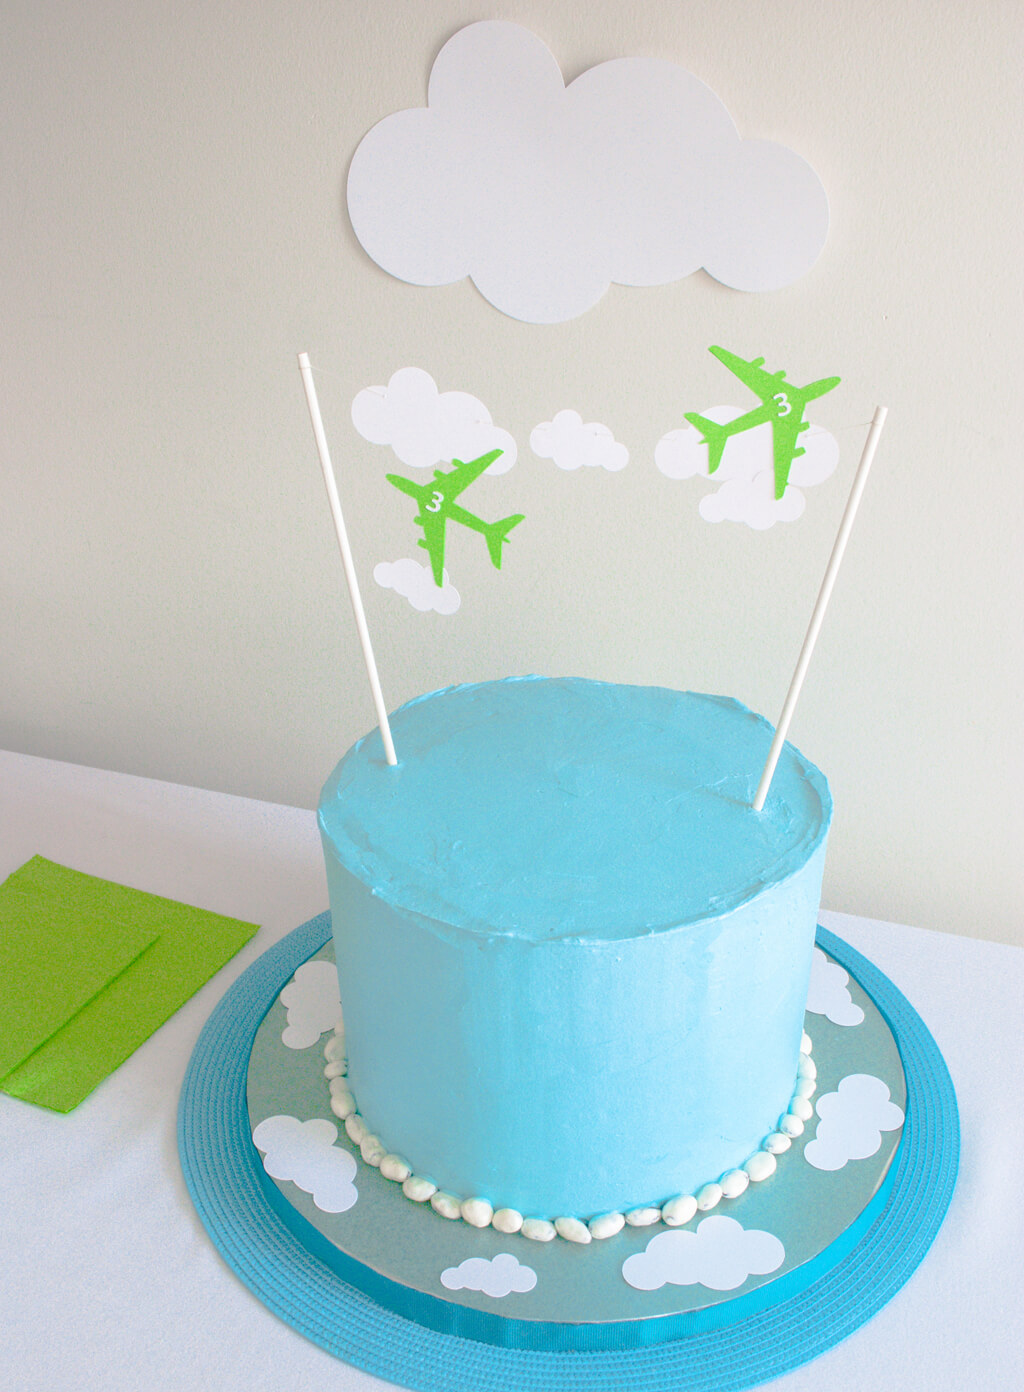 Easy Airplane Birthday Cake for an Airplane Birthday Party. Just print these free printable airplane cake toppers, cut and tie onto lollipop sticks!